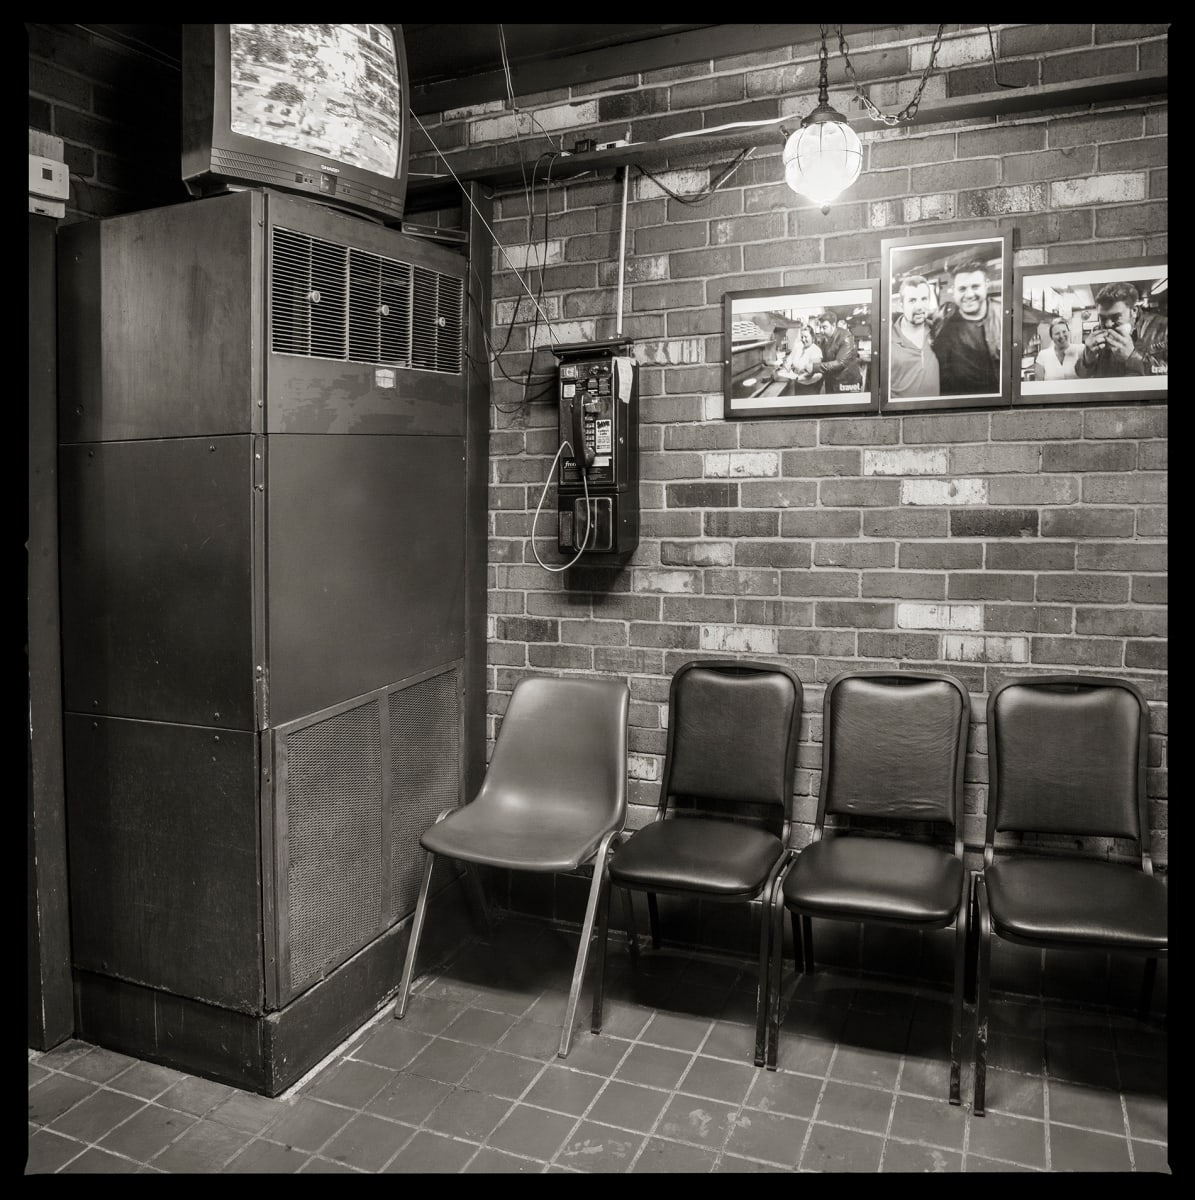 585.235.9156 – Campi’s Restaurant, 205 Scottsville Road, Rochester, NY 14611 by Eric T. Kunsman  Image: ID: A black and white image shows a metal cabinet against a left side of a corner.  On the right side of the corner is a brick wall with four chairs against it, and a wall-mounted payphone.  To the right of the payphone are a variety of framed images.